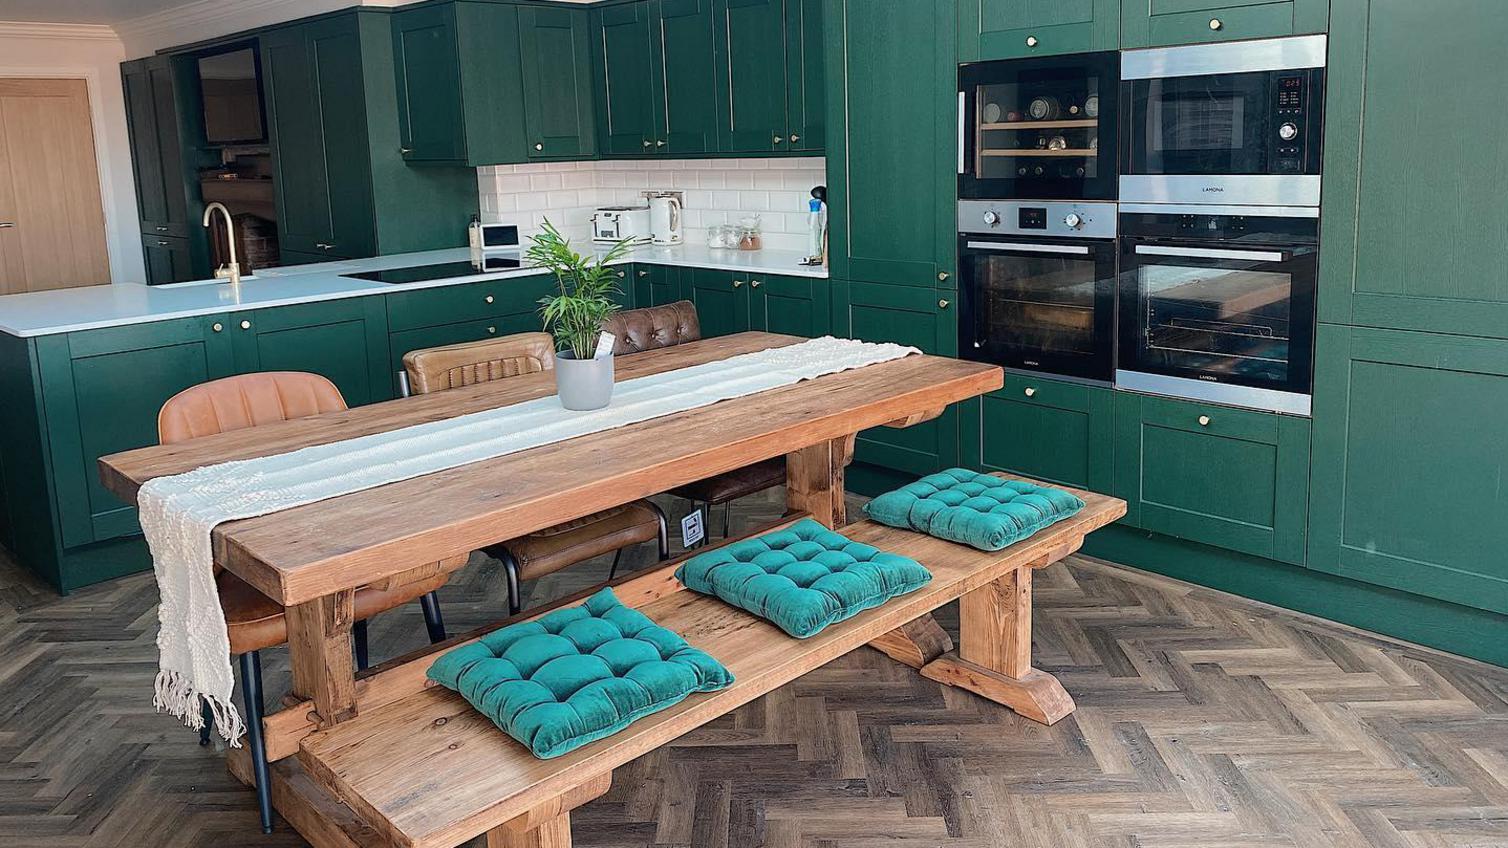 Dark green shaker kitchen ideas with gold knob handles, built in cooking devices, and an oak bench table with green cushions.